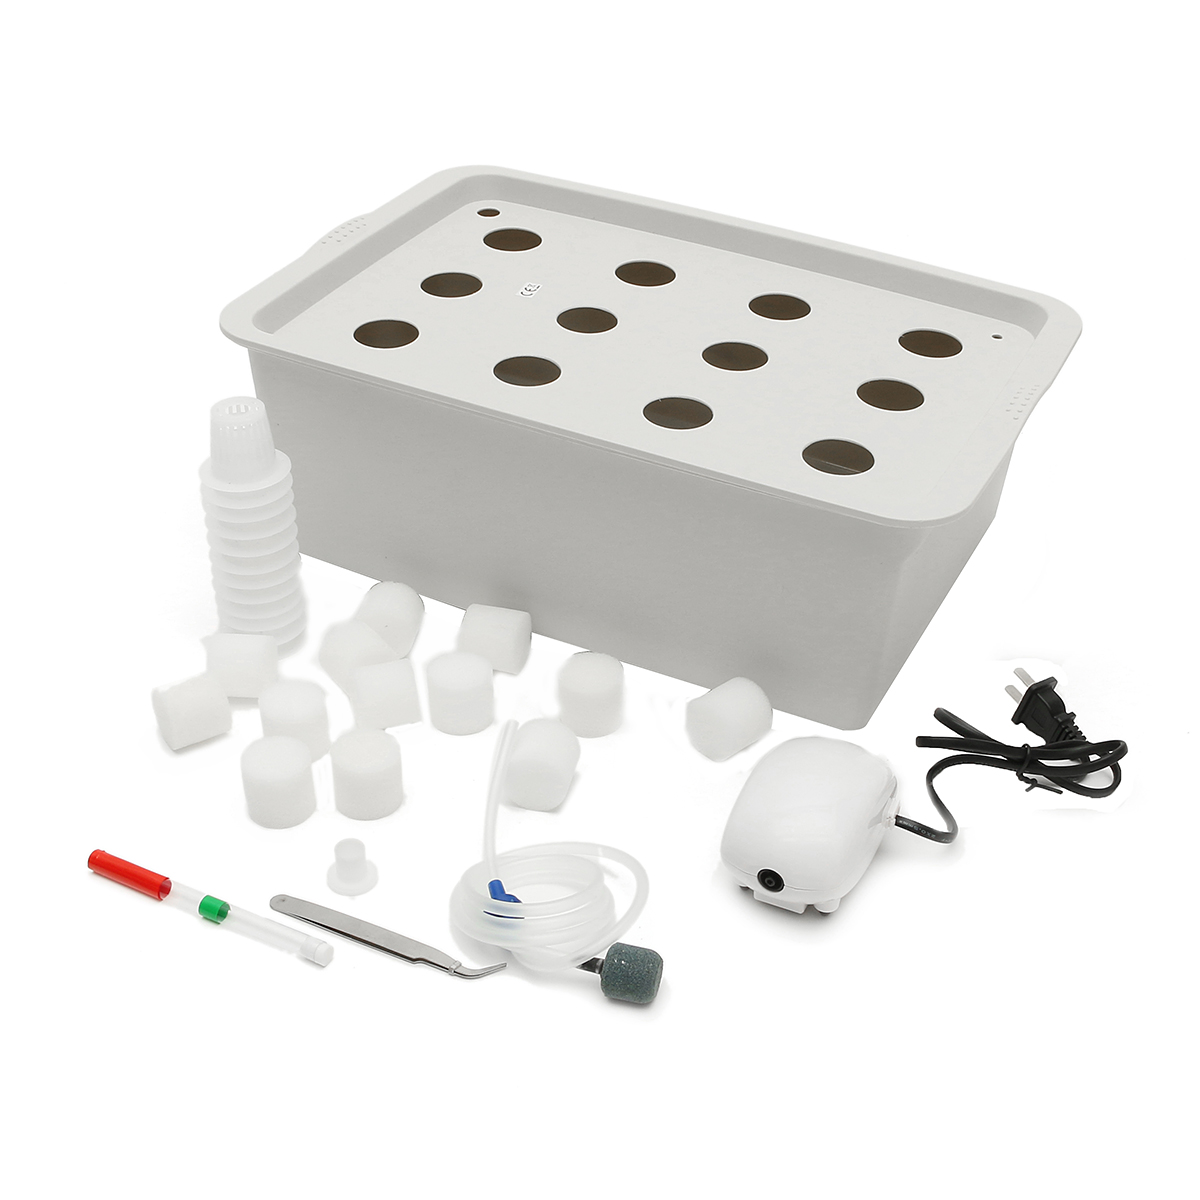 220V-Hydroponic-System-Kit-12-Holes-DWC-Soilless-Cultivation-Indoor-Water-Planting-Grow-Box-1186050-1